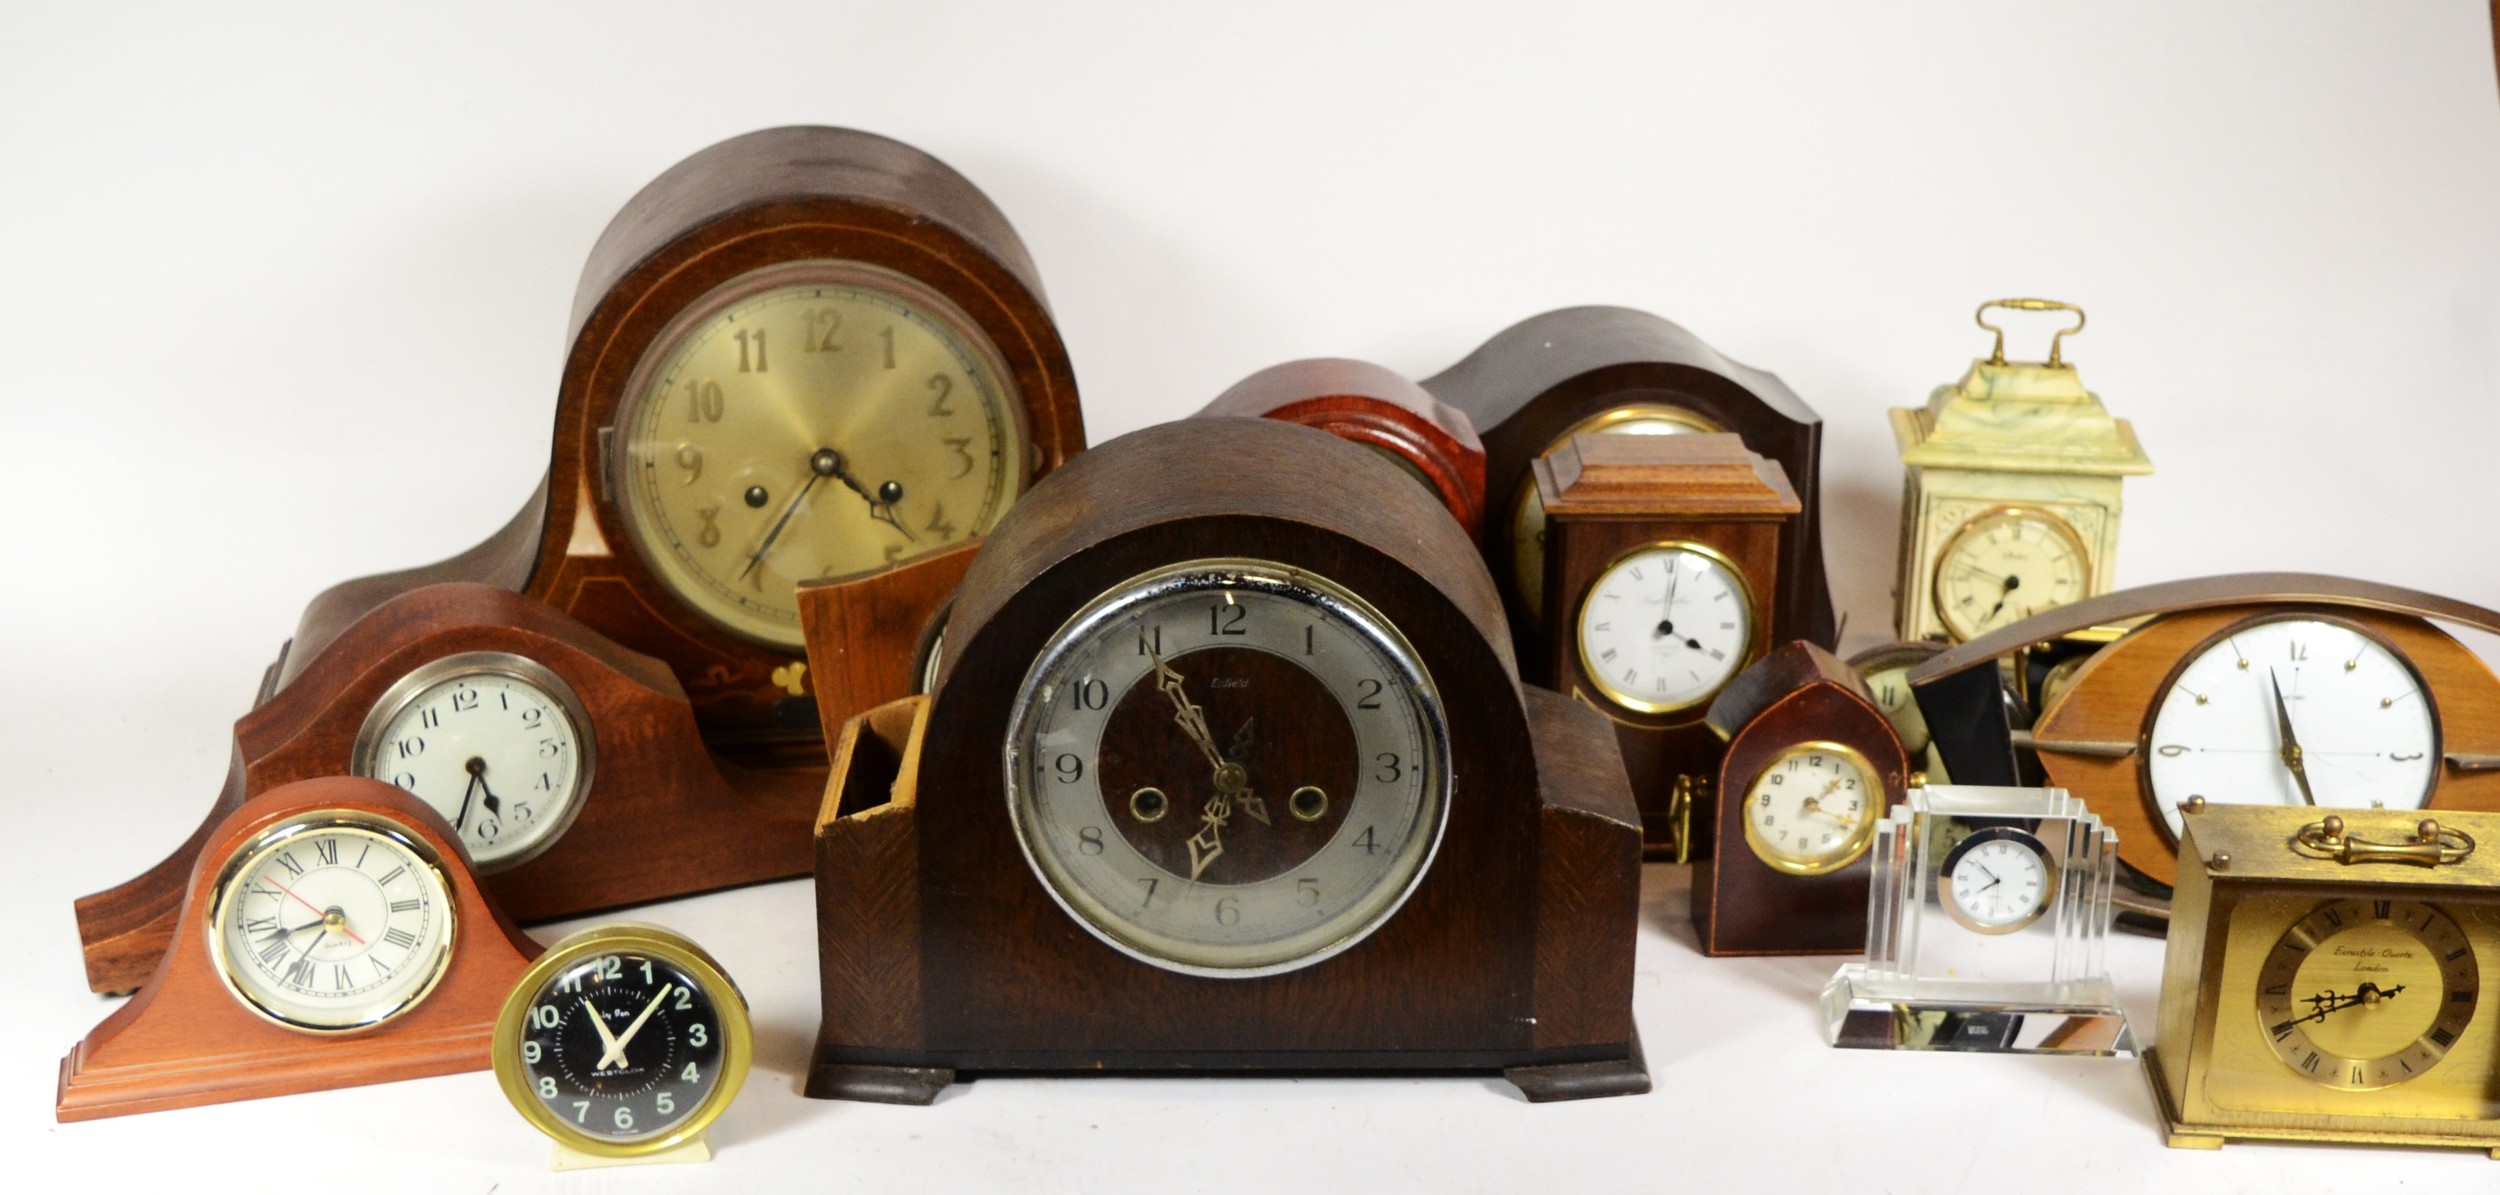 A collection of mid 20th century and later mantel clocks, having manual and quartz movements, in - Image 3 of 3